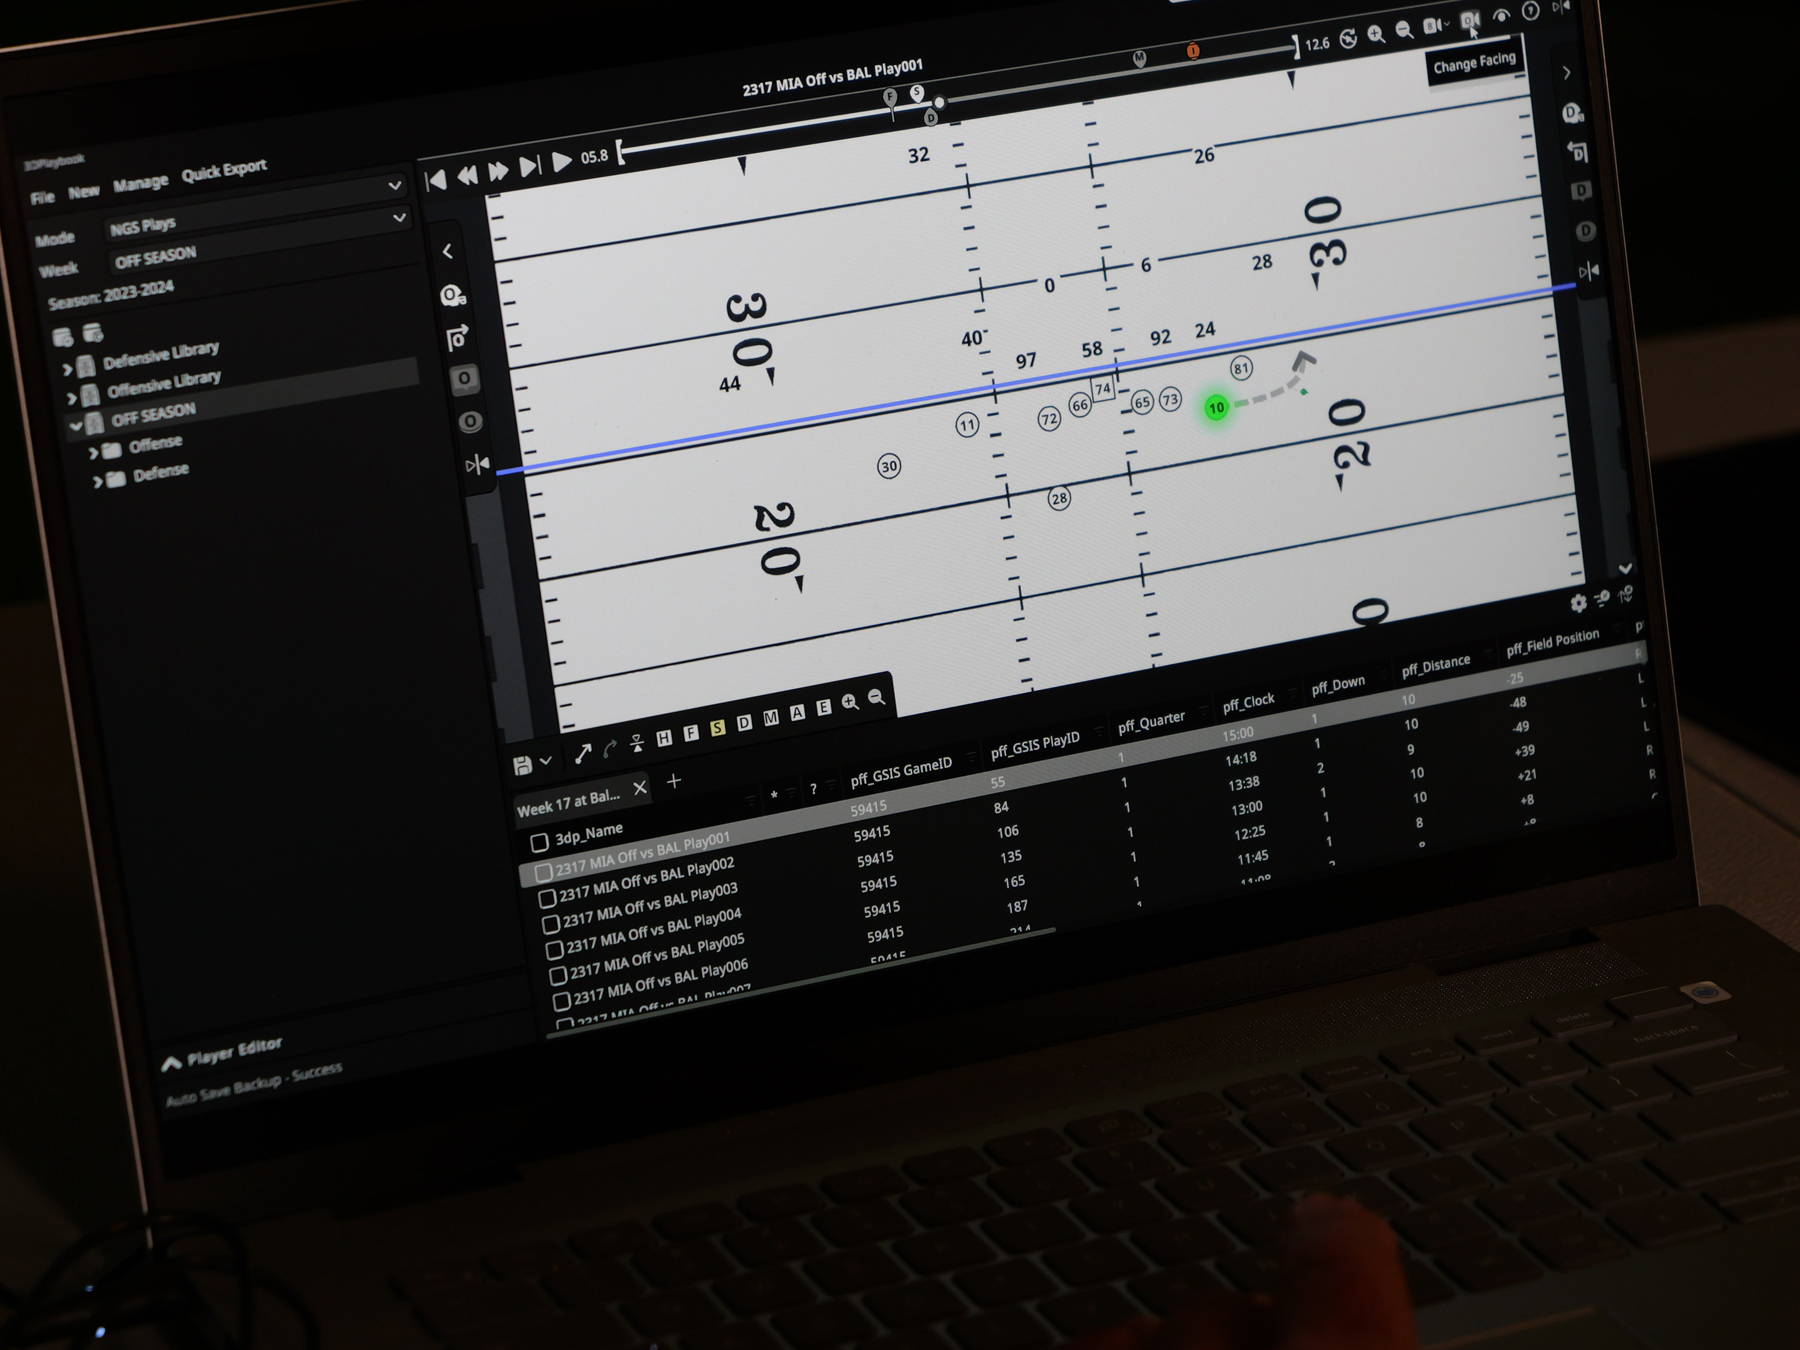 The formation screen in 3D Playbook allows a coach to change and customize details of each play, including pre-snap motions. On the set-up screen, individuals show up at Xs for defense and Os for offense. Lines show their motion.